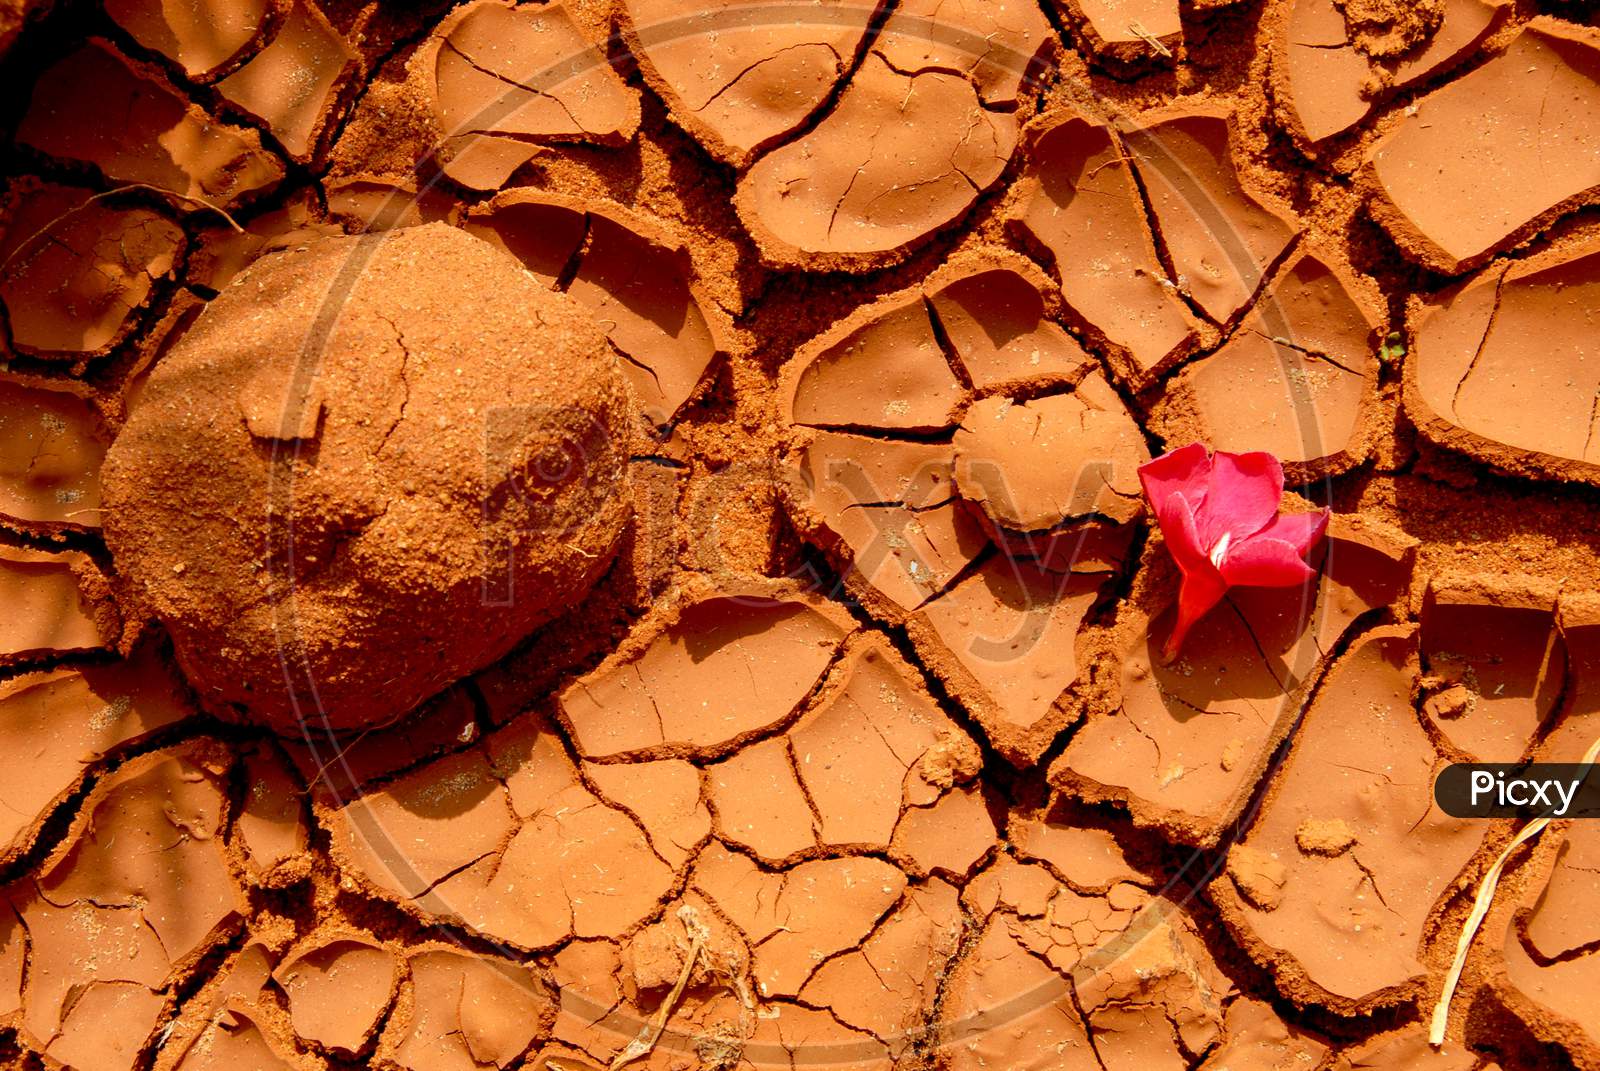 Drought Land With Cracks in Soil